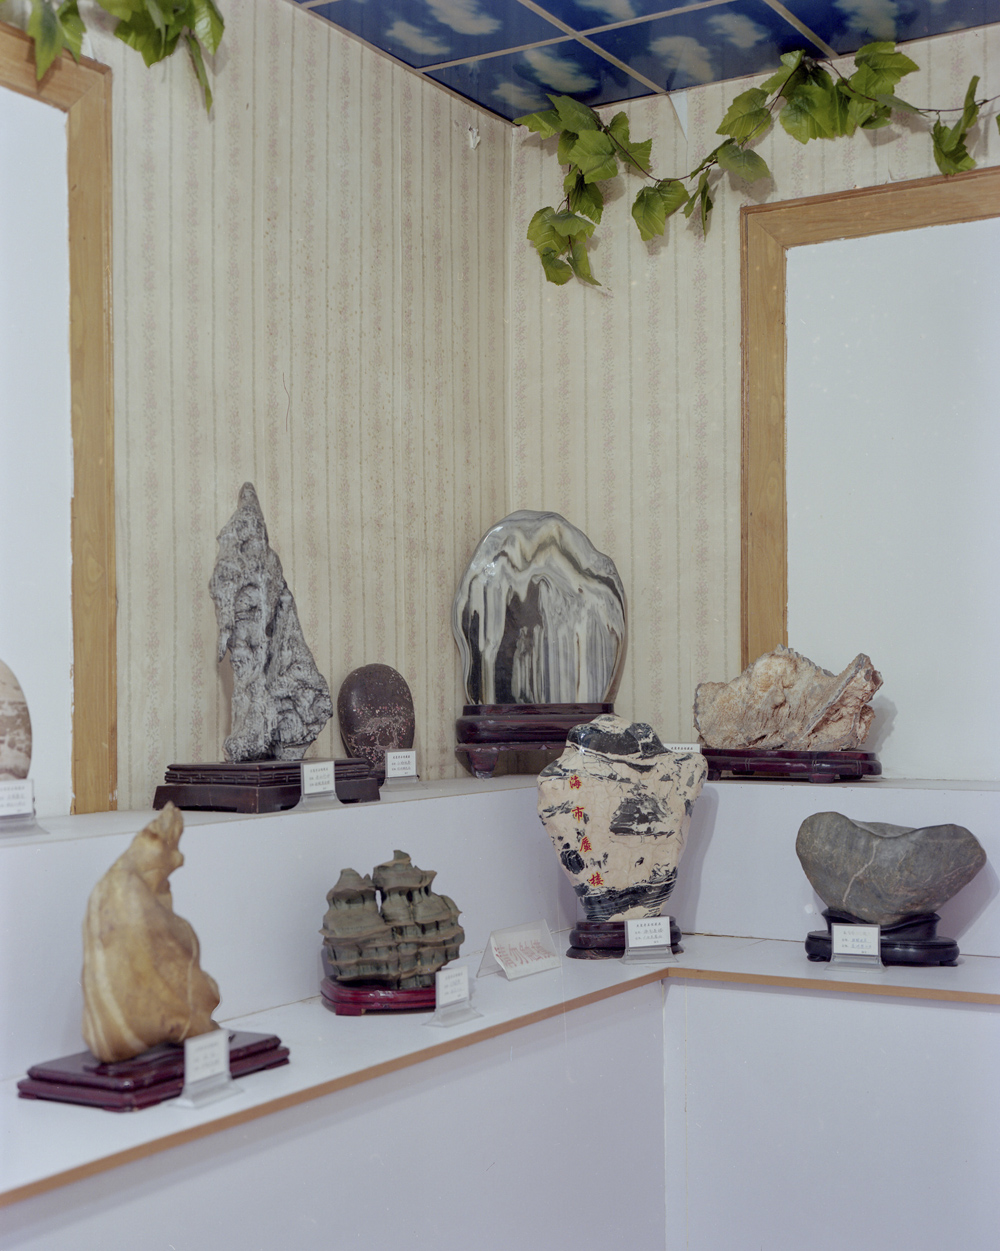 An exhibition showing stones collected from the forest park in Dazhai Village, Shanxi province, April 19, 2021. Shi Yangkun/Sixth Tone